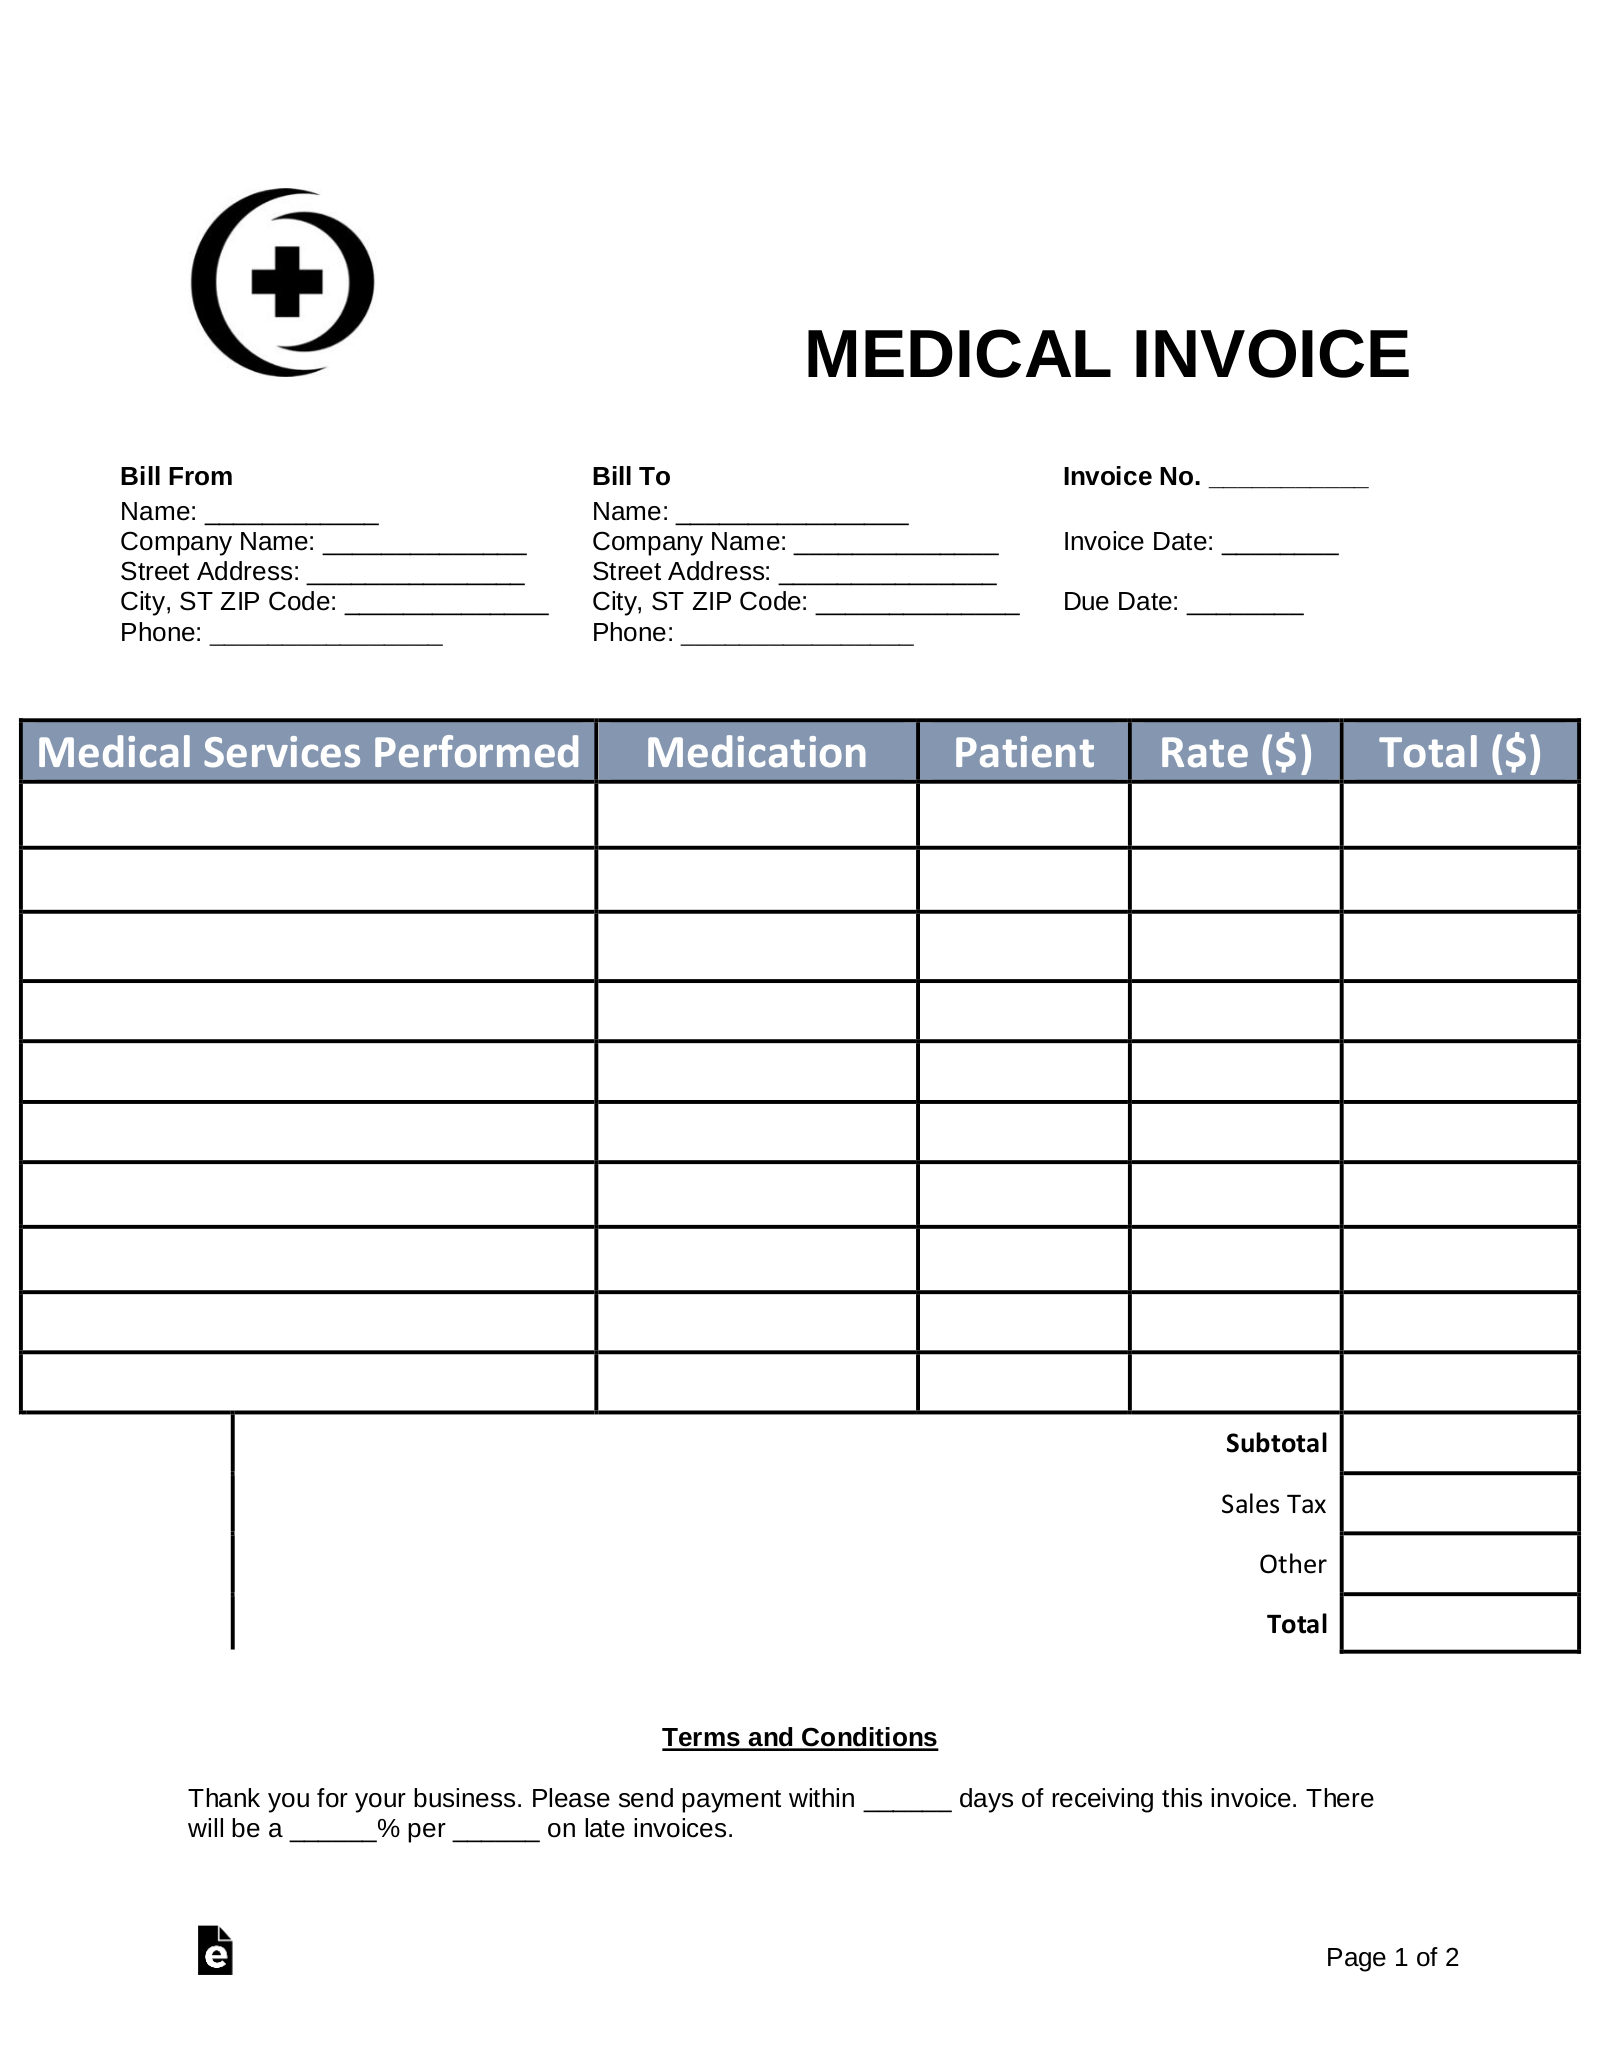 Free Medical Invoice Template - PDF | Word – eForms